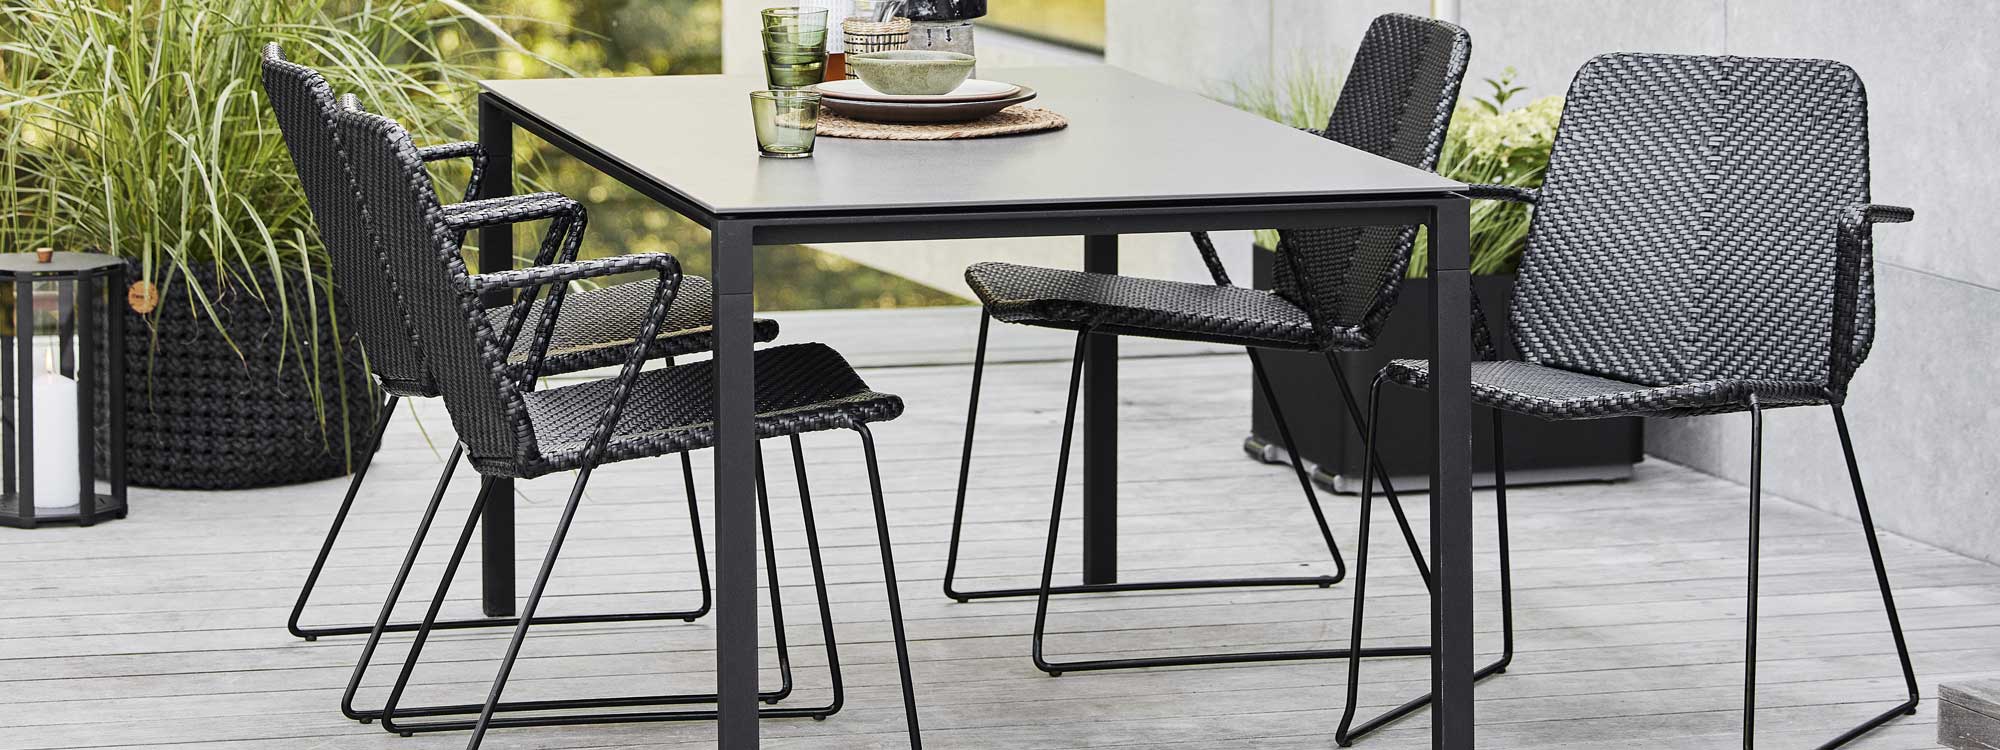 Image of Vision chairs without cushions and Pure dining table by Caneline garden furniture